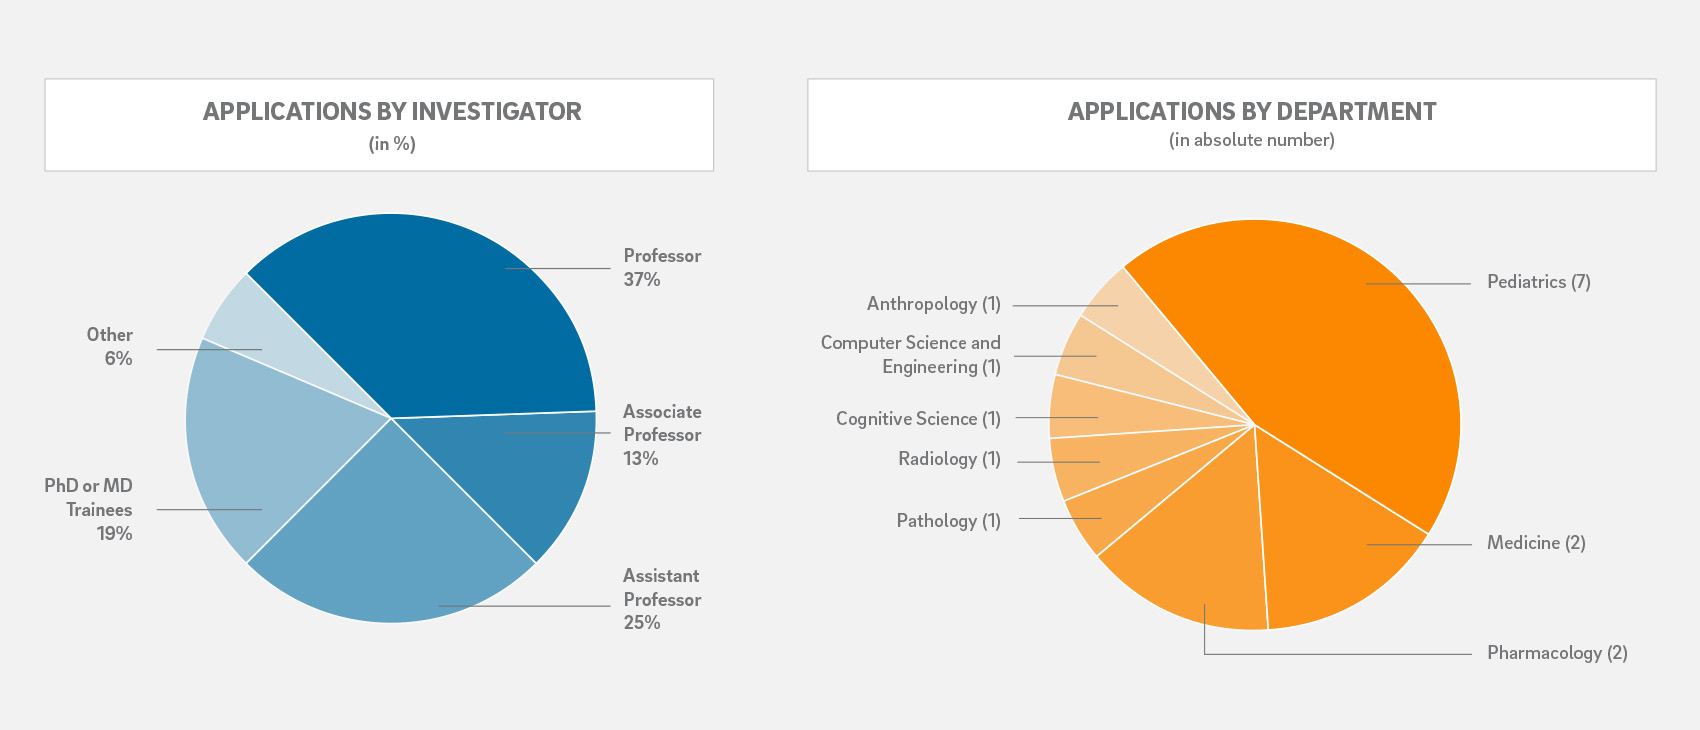 pie charts for percentages of applications by investigator level and by department